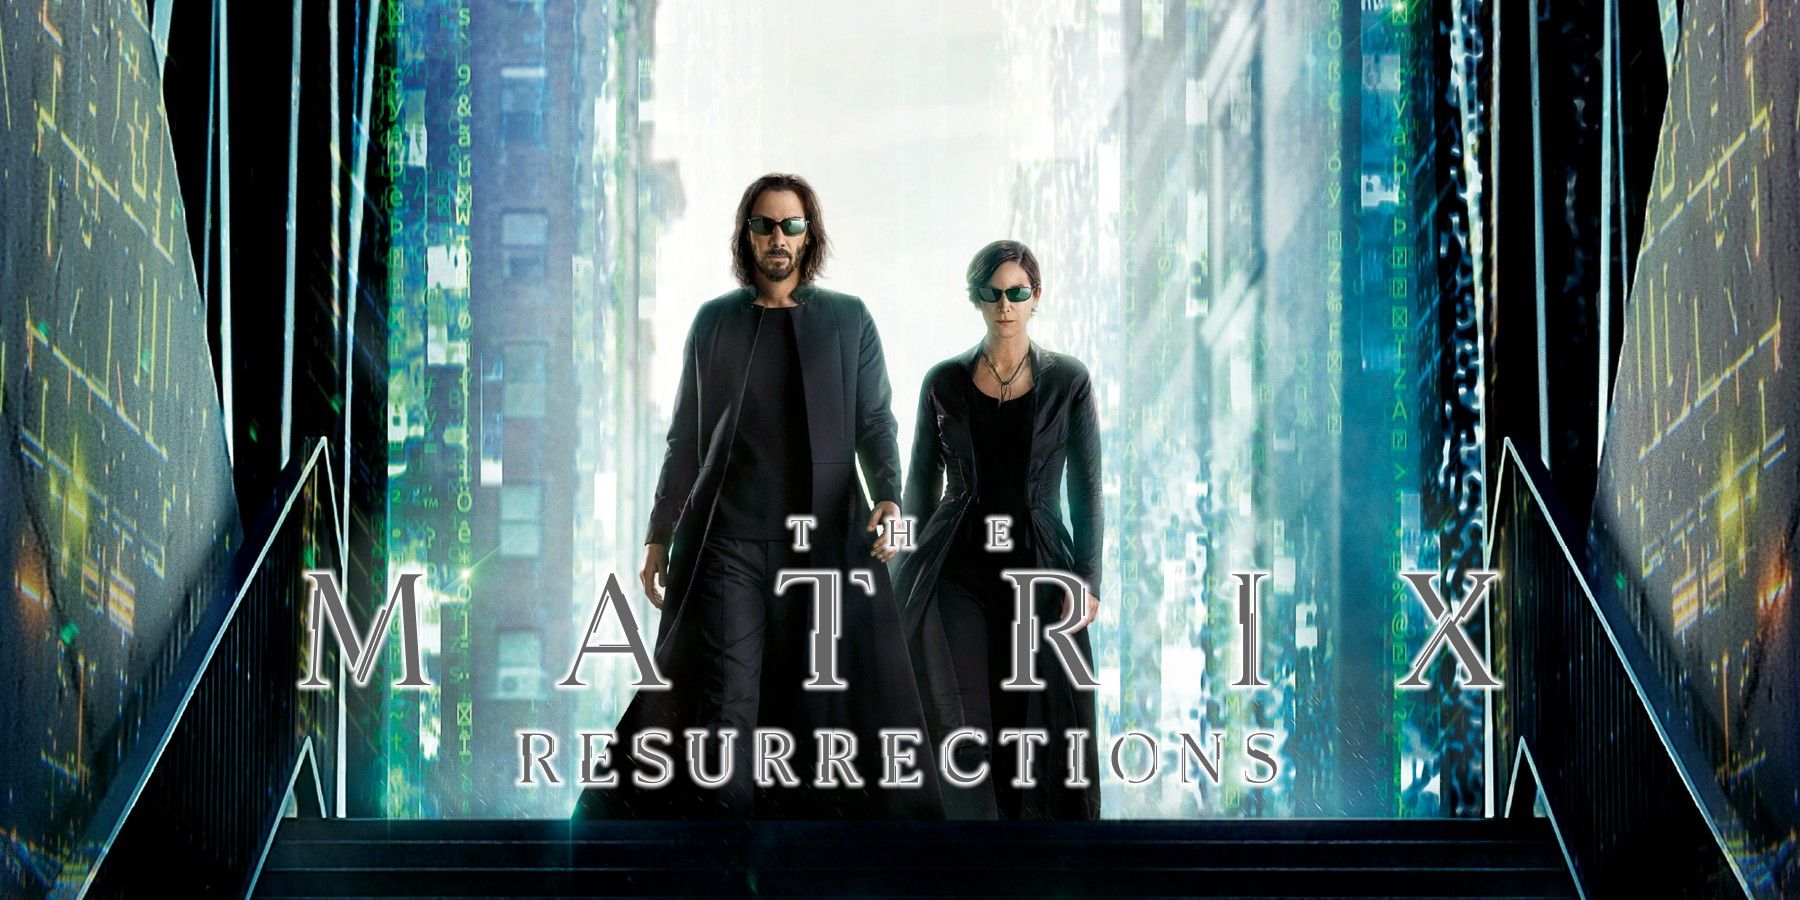 The Matrix Resurrections Keanu Reeves Carrie-Anne Moss Neo Trinity